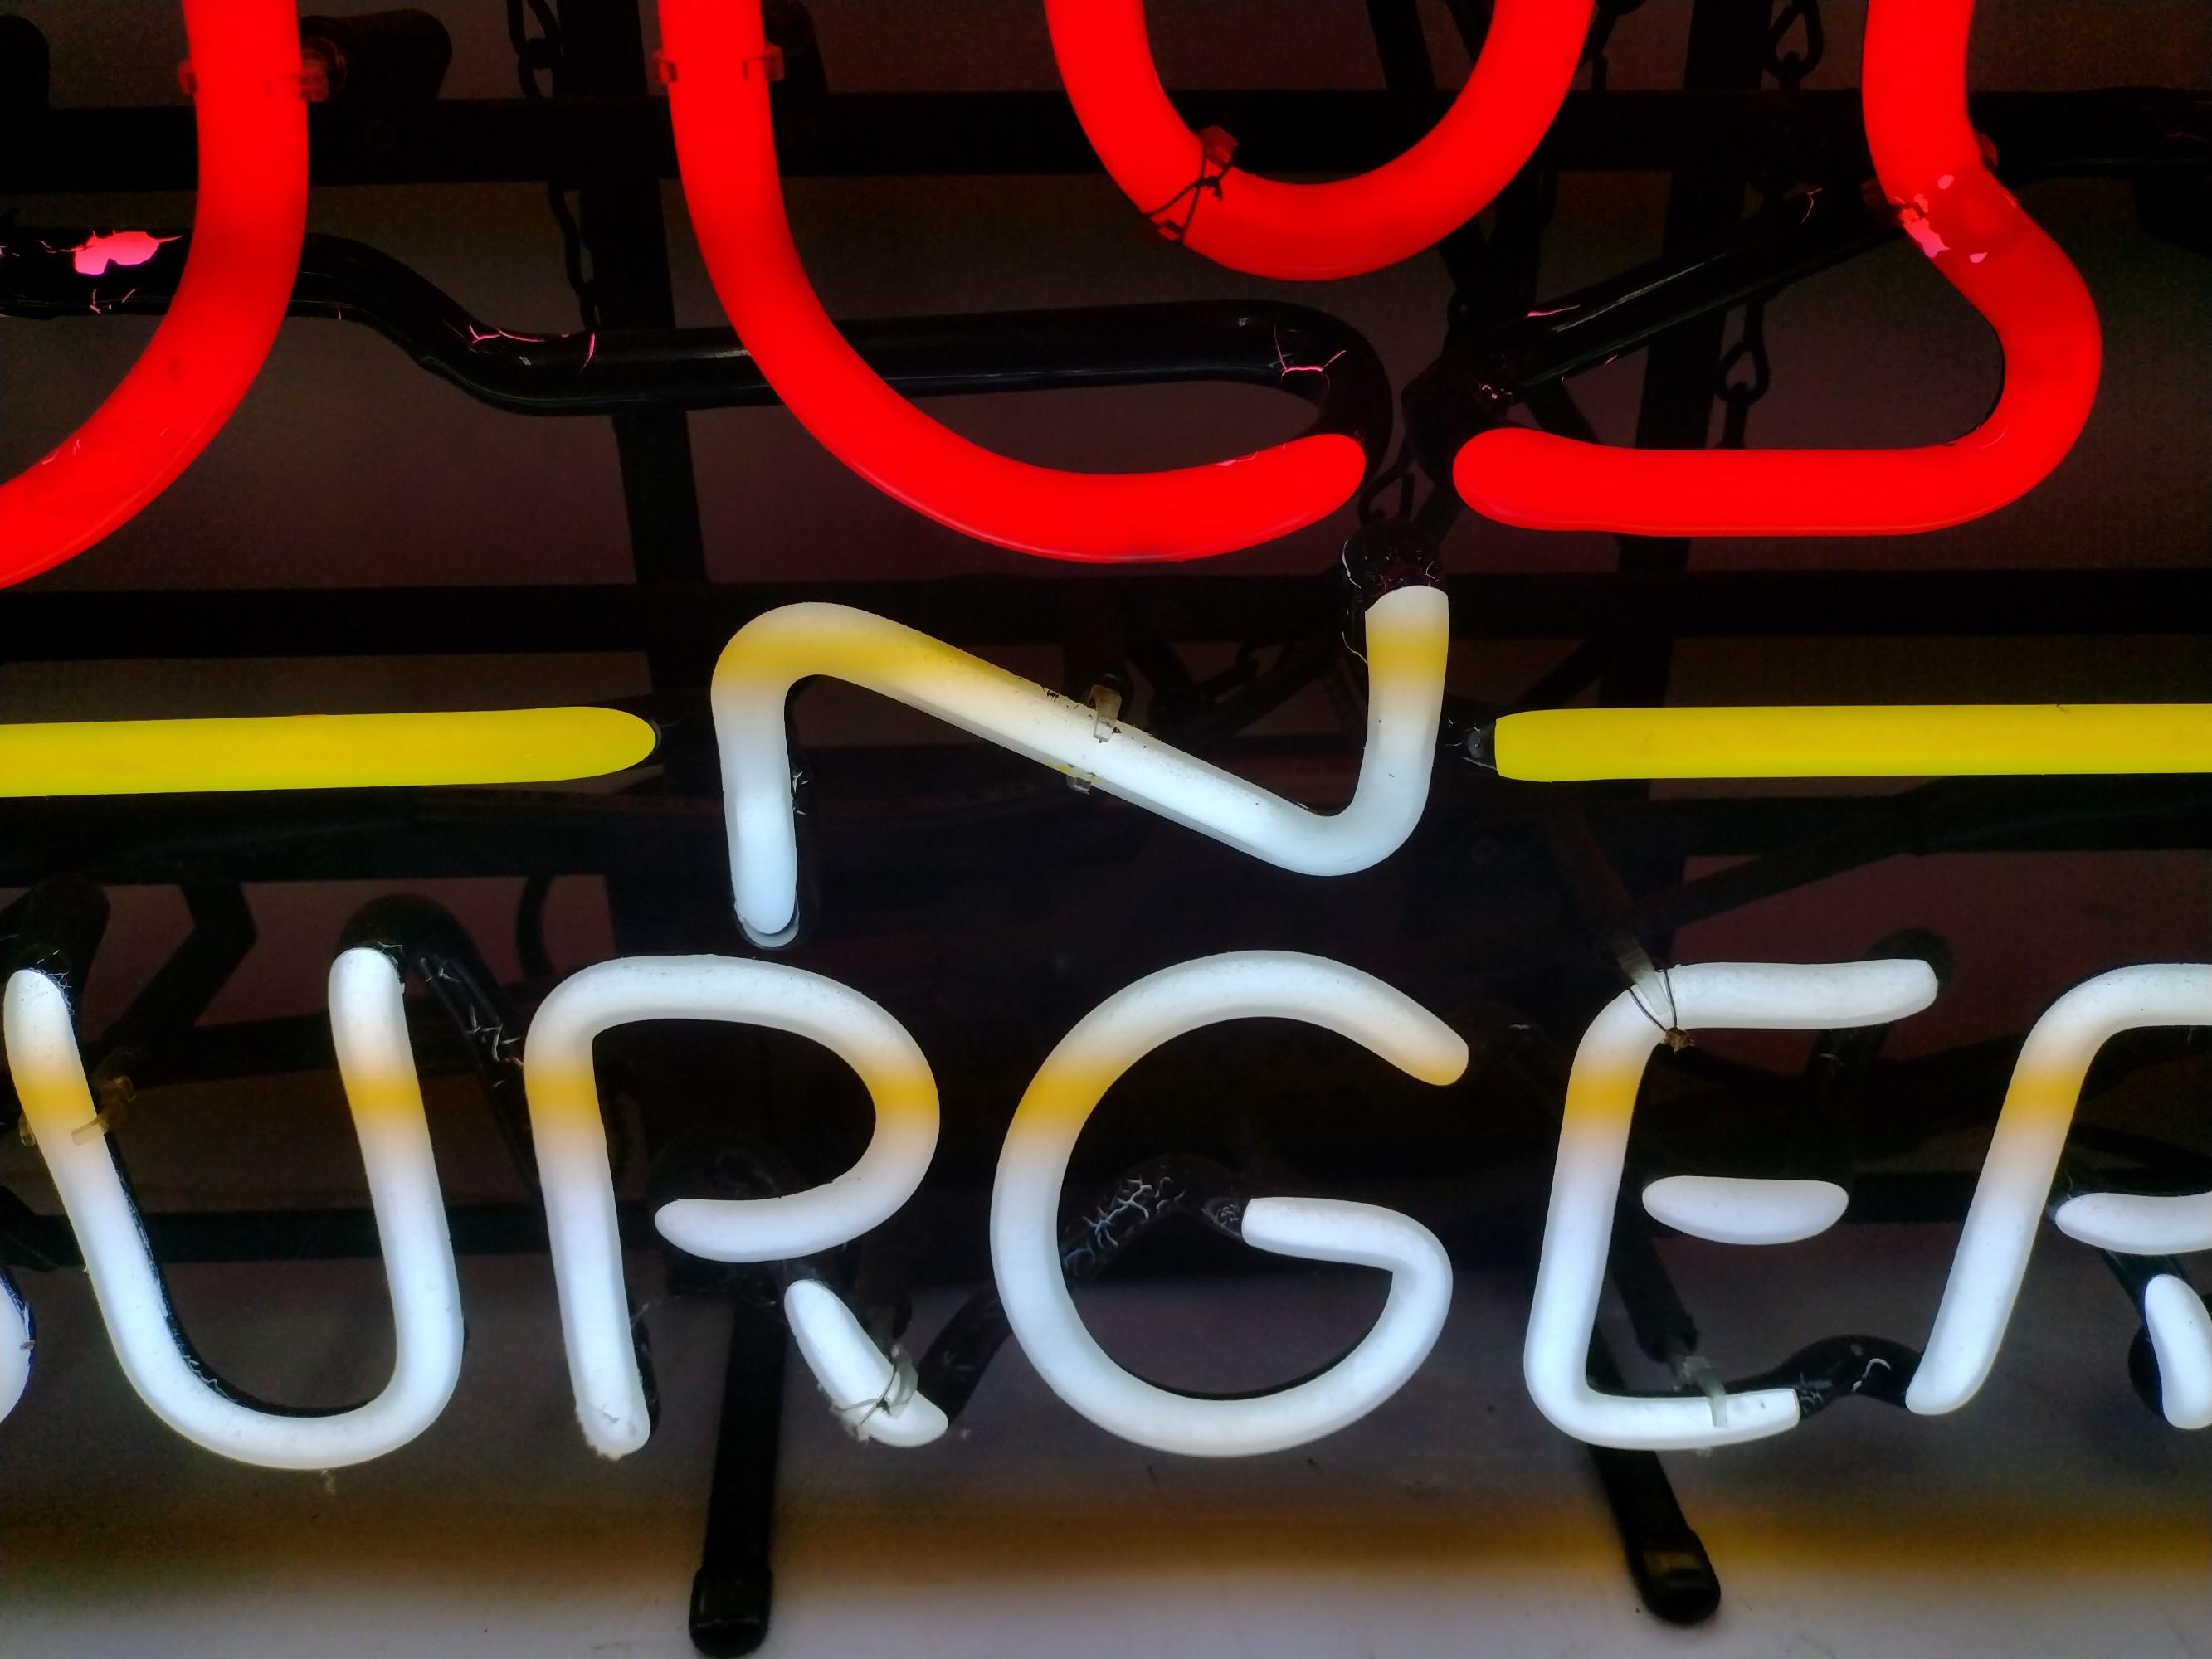 Bud and Burgers Neon Advertising Sign